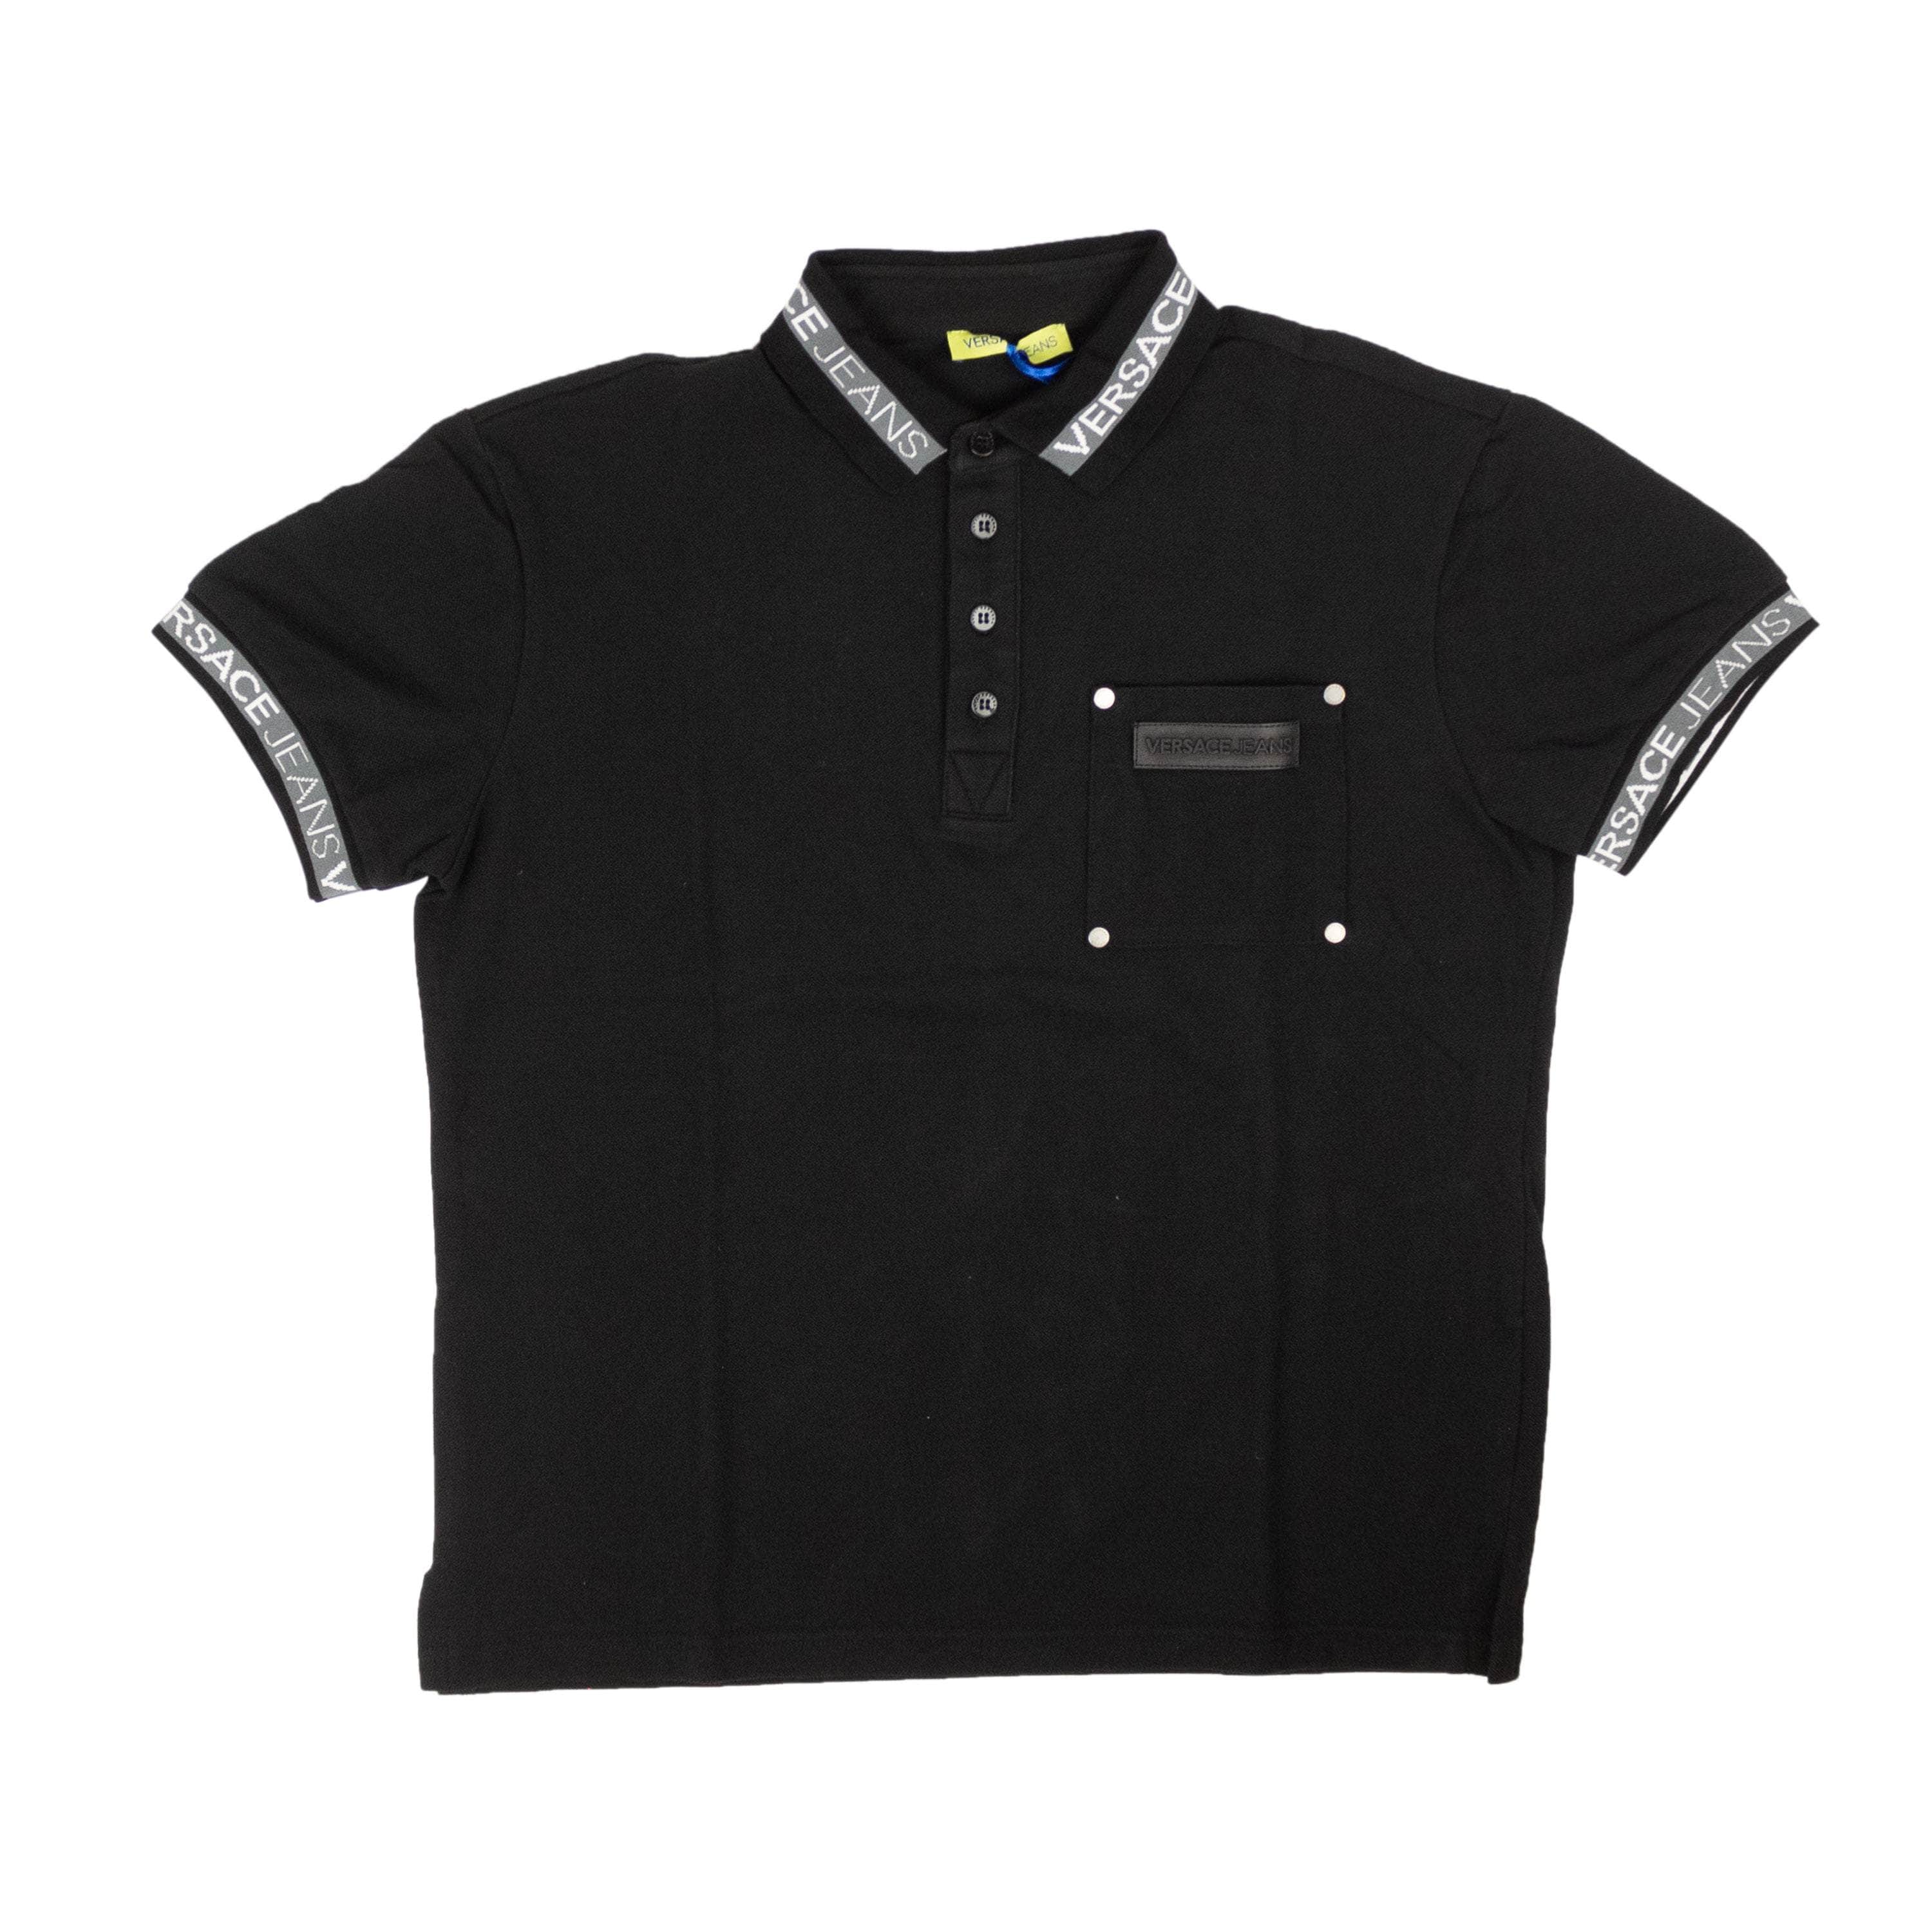 Versace channelenable-all, chicmi, couponcollection, gender-mens, main-clothing, mens-shoes, shop375, size-44, size-48, size-50, size-52, Stadium Goods, under-250, versace Black & White Logo On Collar T-Shirt